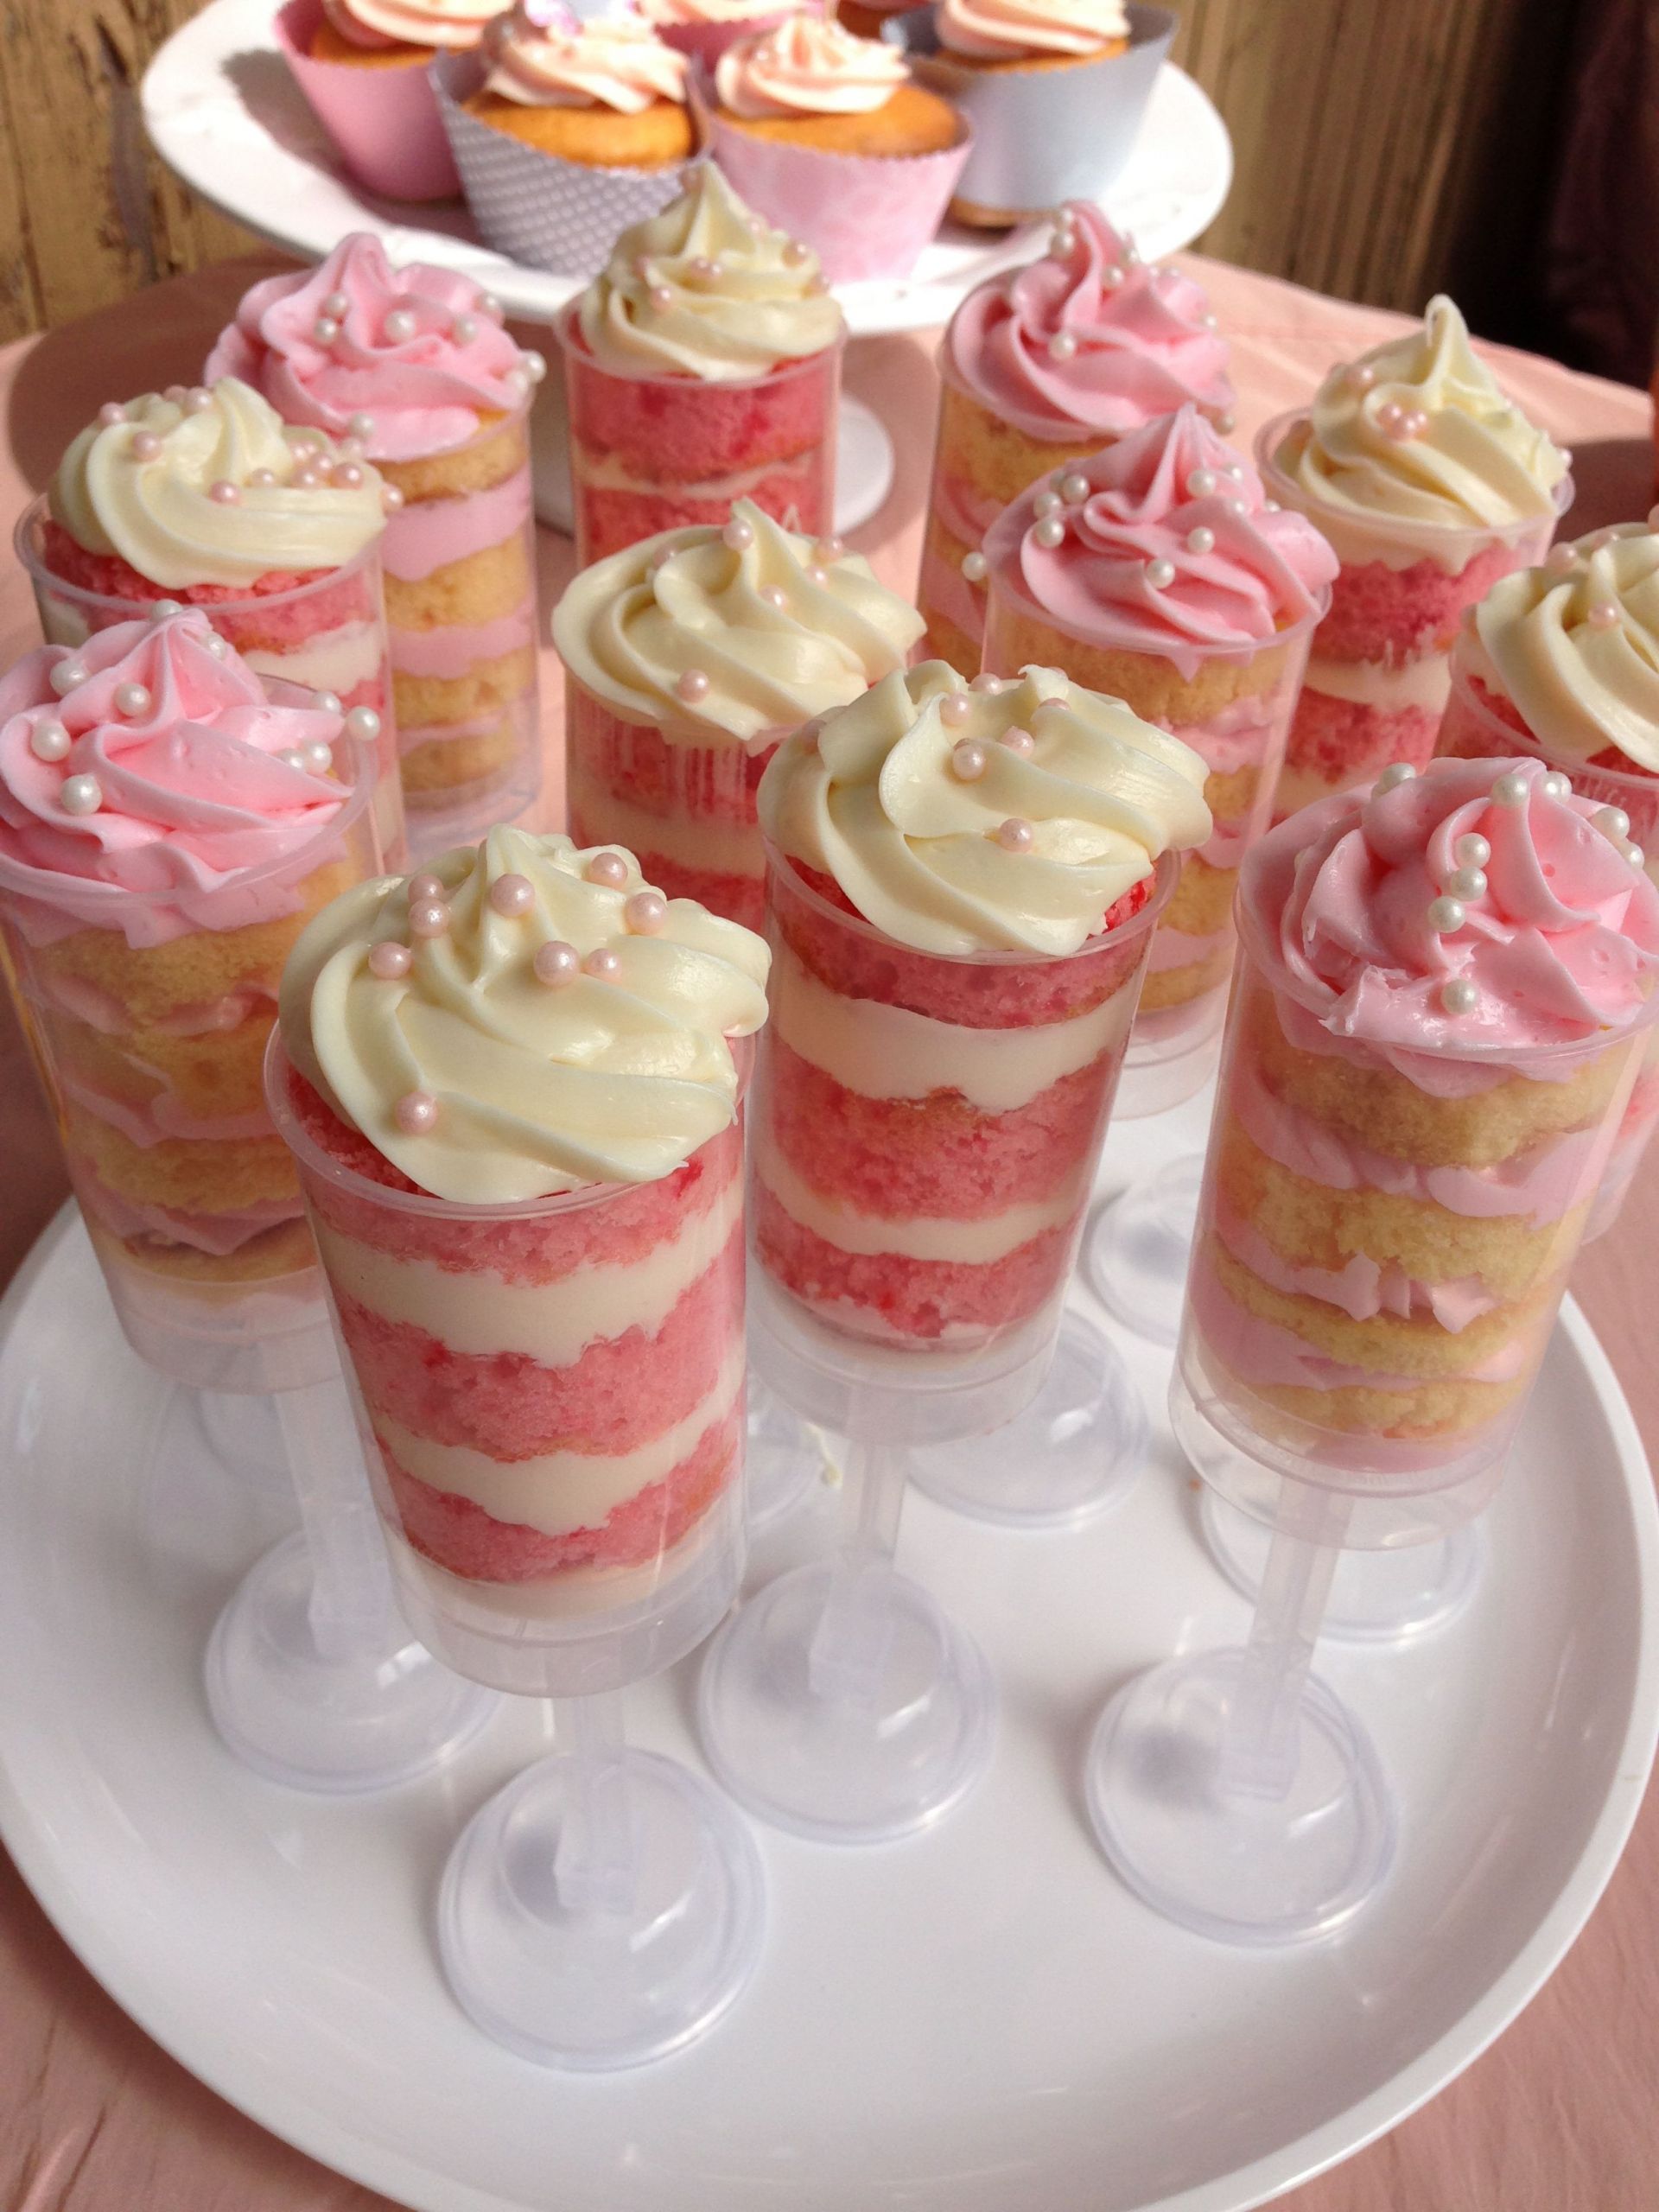 Pink Desserts For Baby Shower
 Yummy push pops for "pretty in pink" baby shower dessert